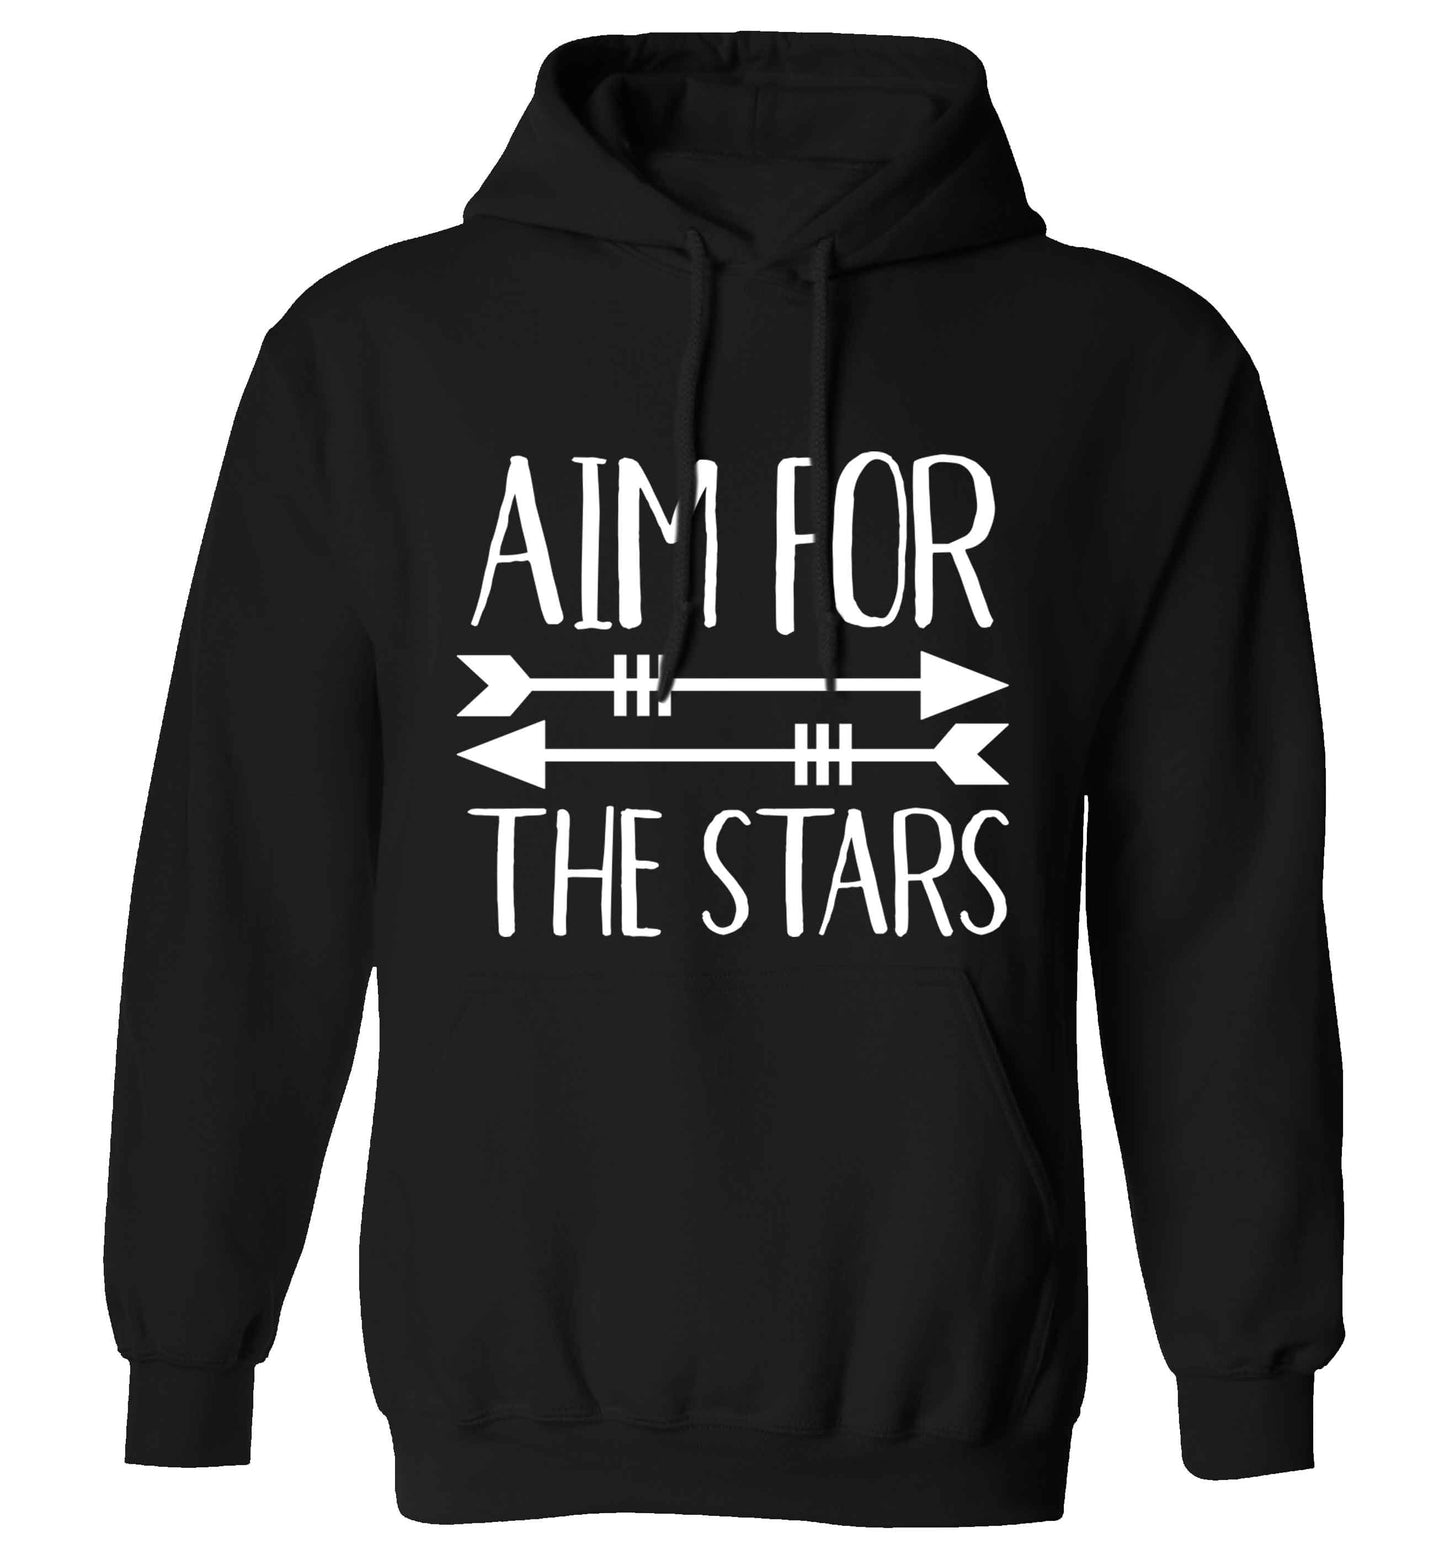 Aim for the stars adults unisex black hoodie 2XL